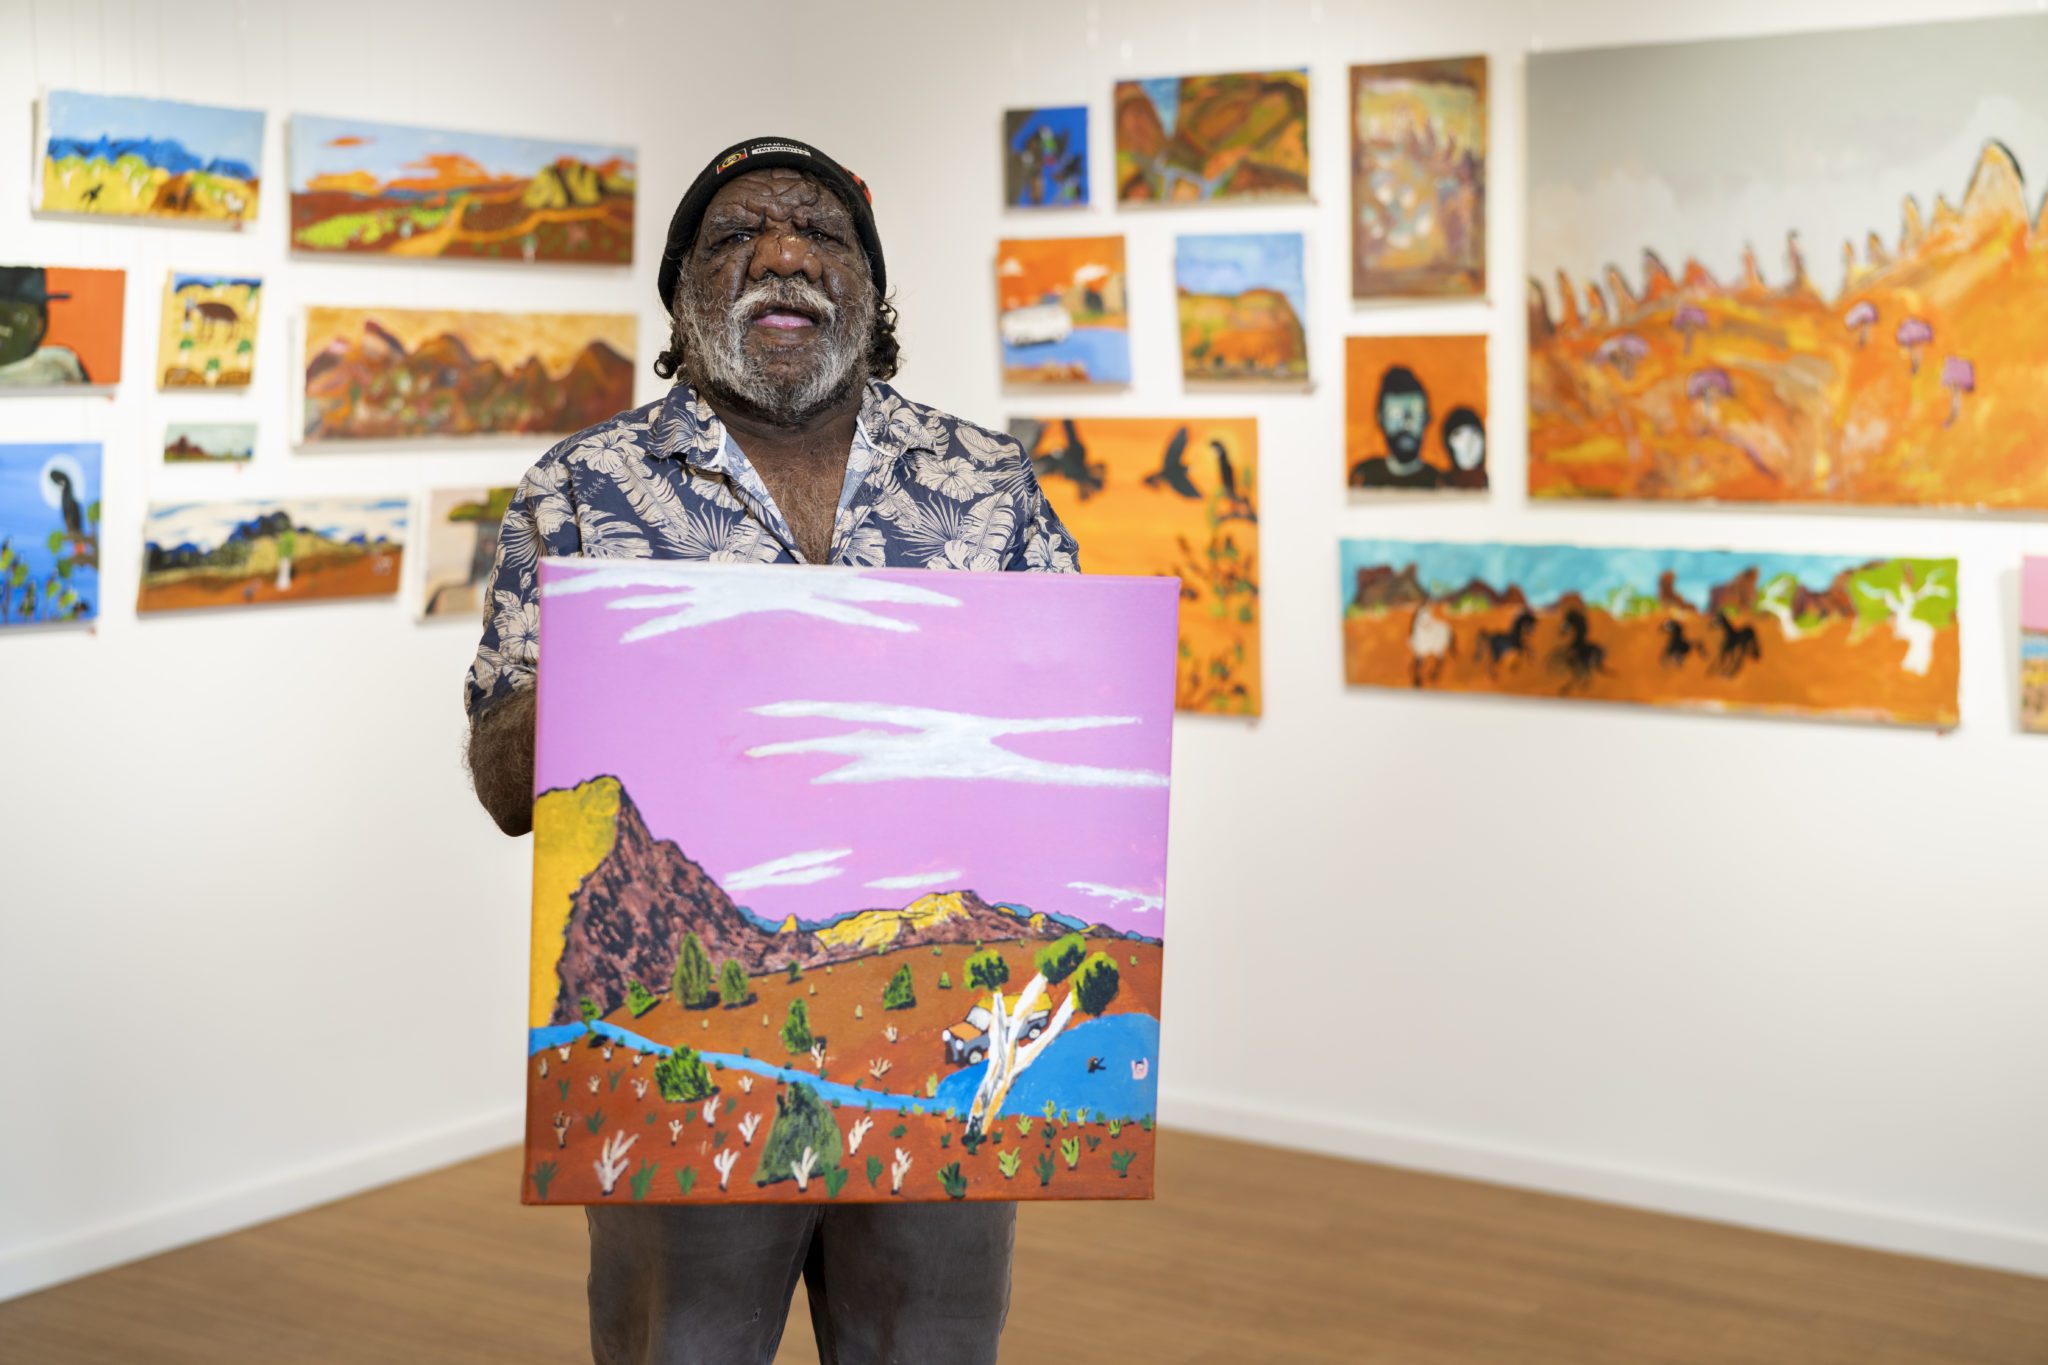 Bindi Mwerre Anthurre art portrays the essence, beauty and humour of Central Australia. Each artwork is a reflection of the life and surrounds of the region as seen, known and loved by the artists.